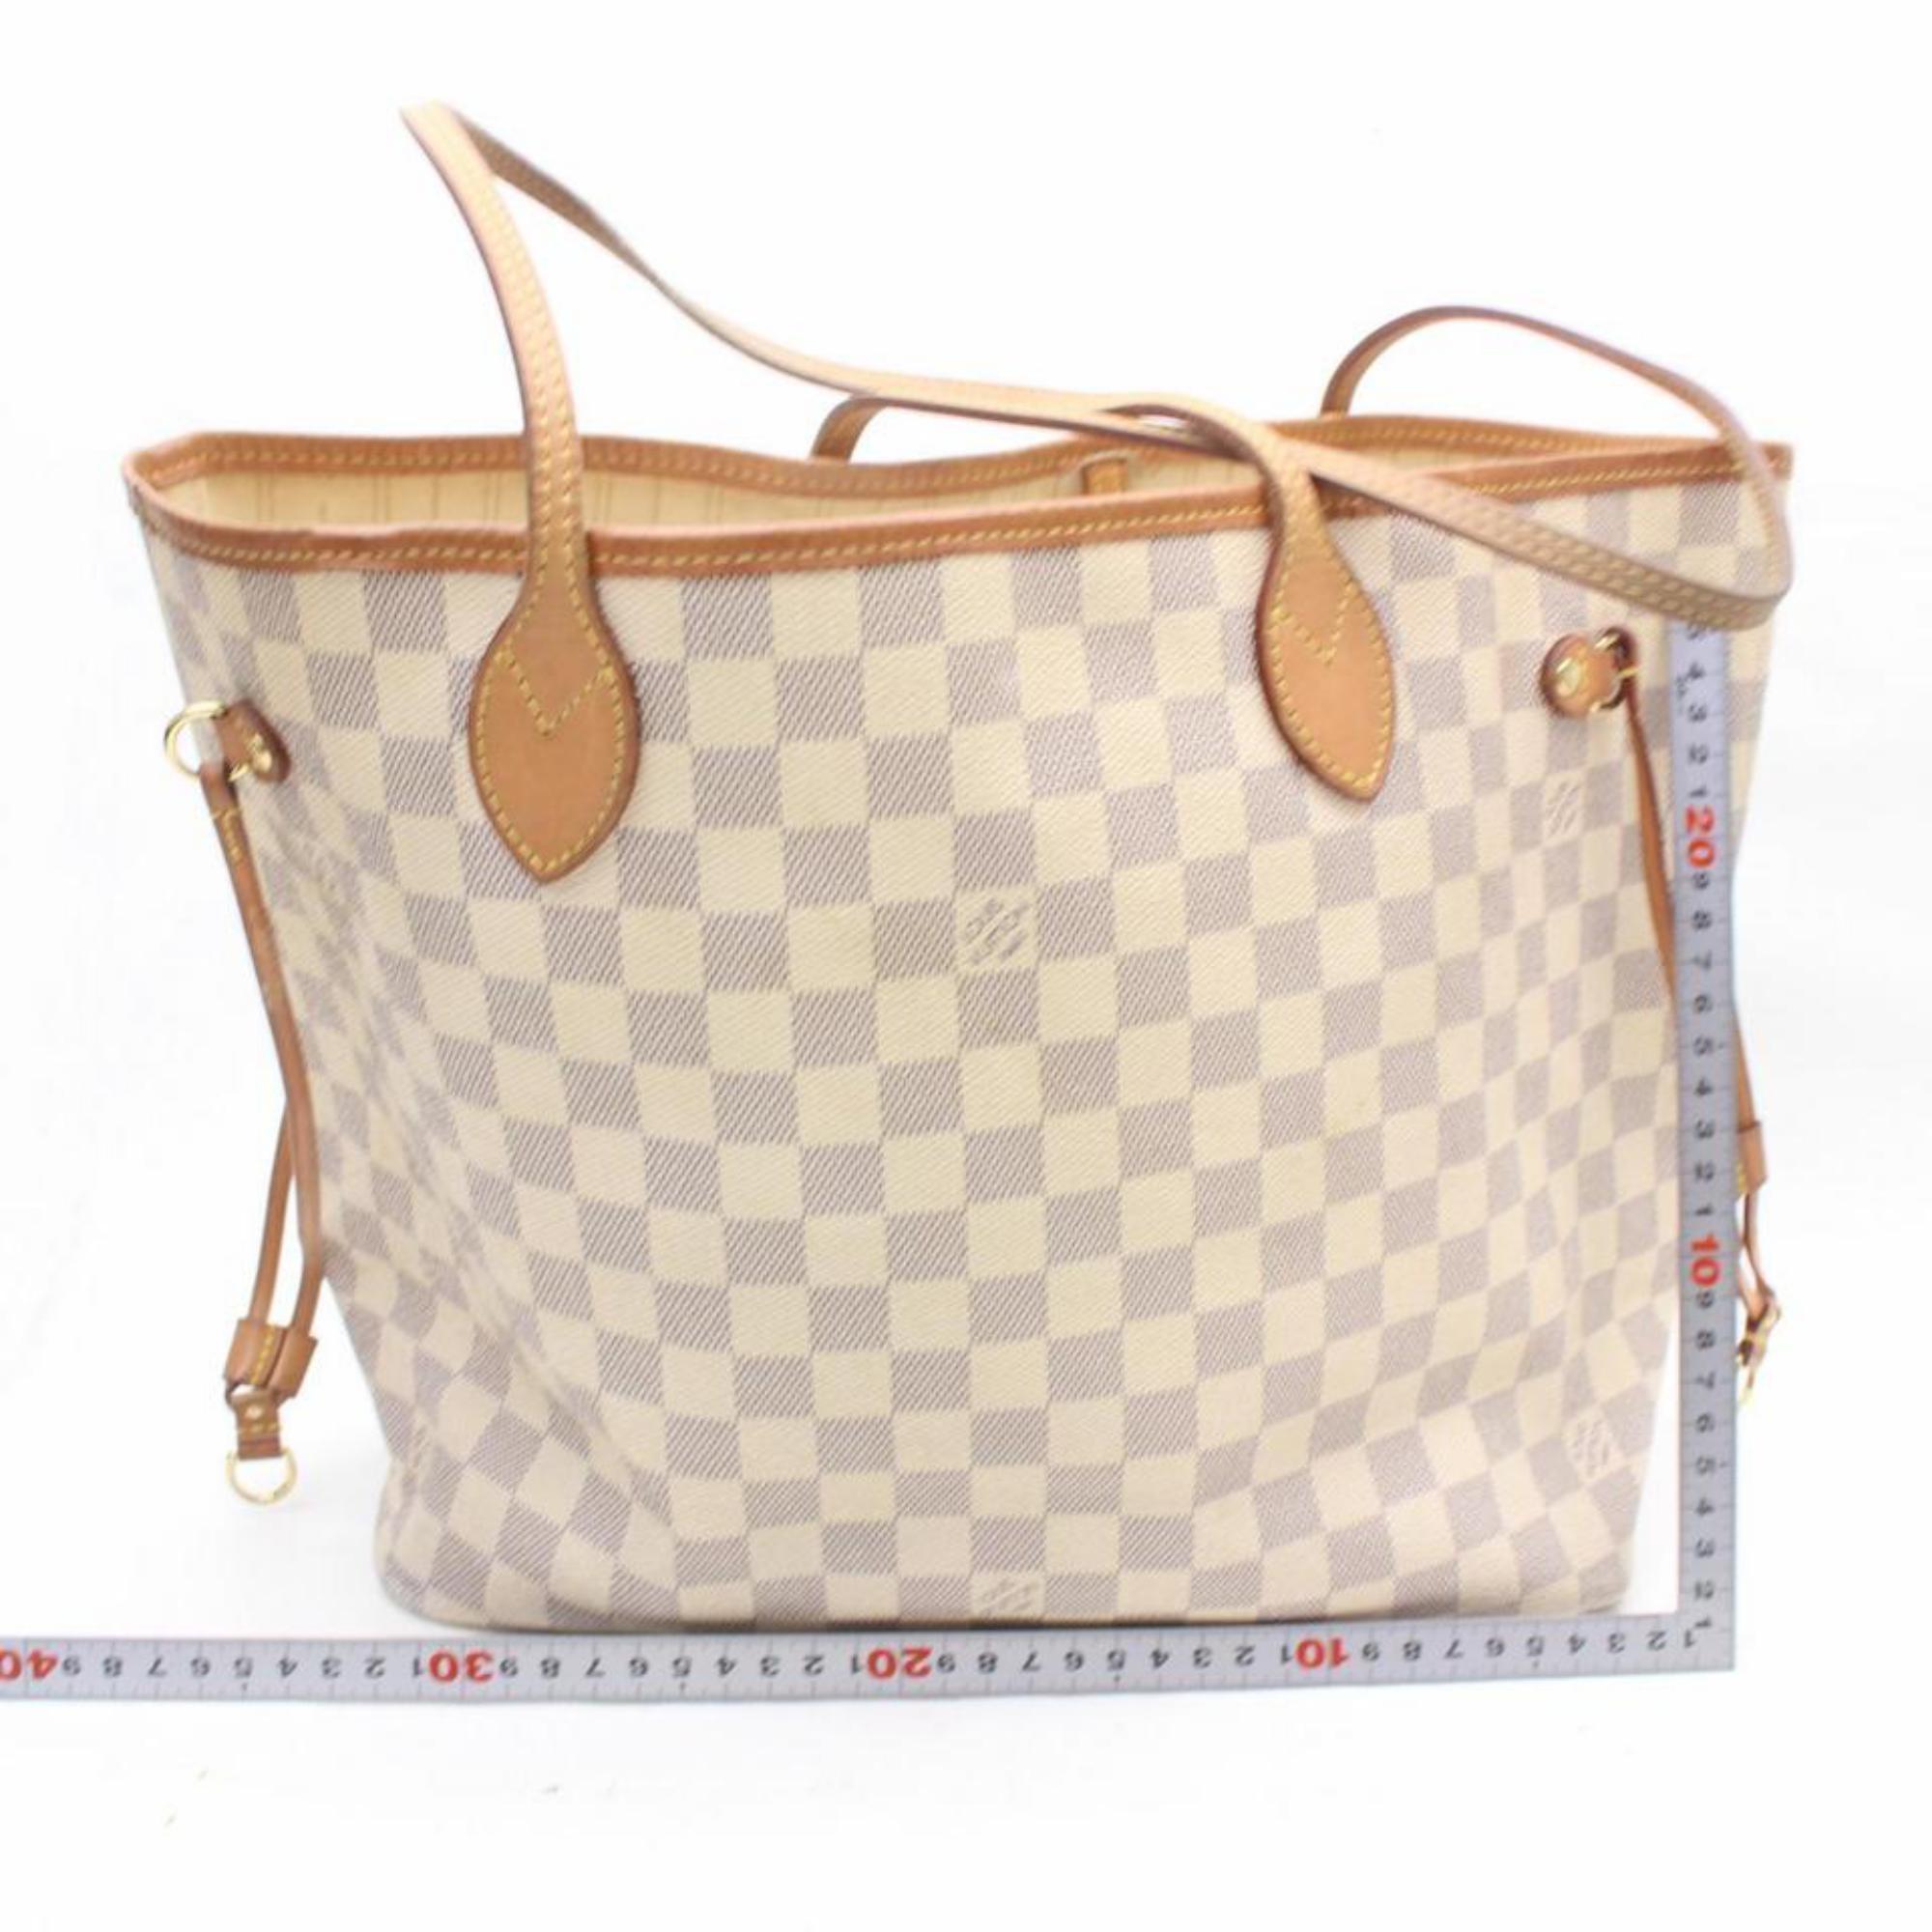 Louis Vuitton Neverfull Damier Azur Mm 869418 Whites Coated Canvas Tote For Sale 2